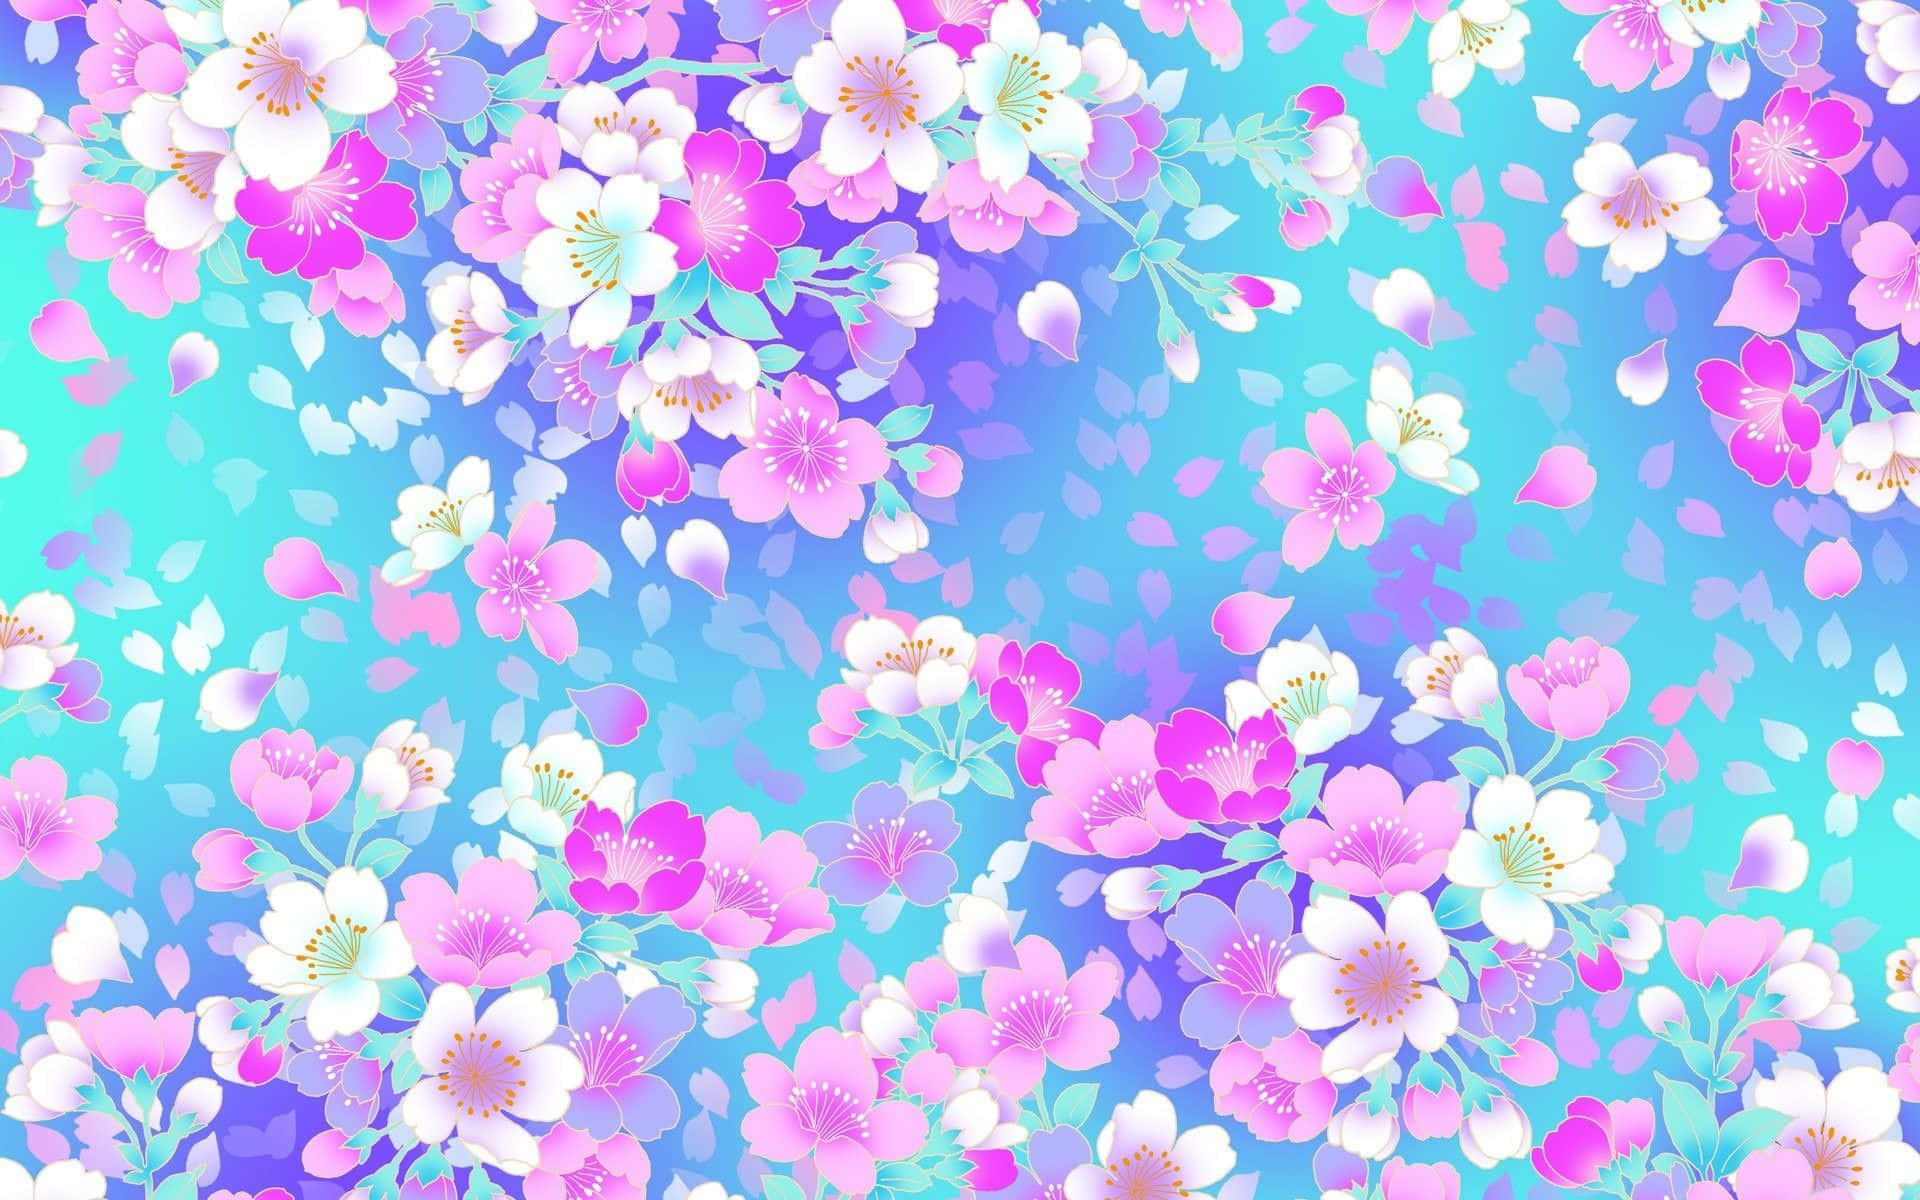 A vibrant purple floral background with beautiful petals in bloom.